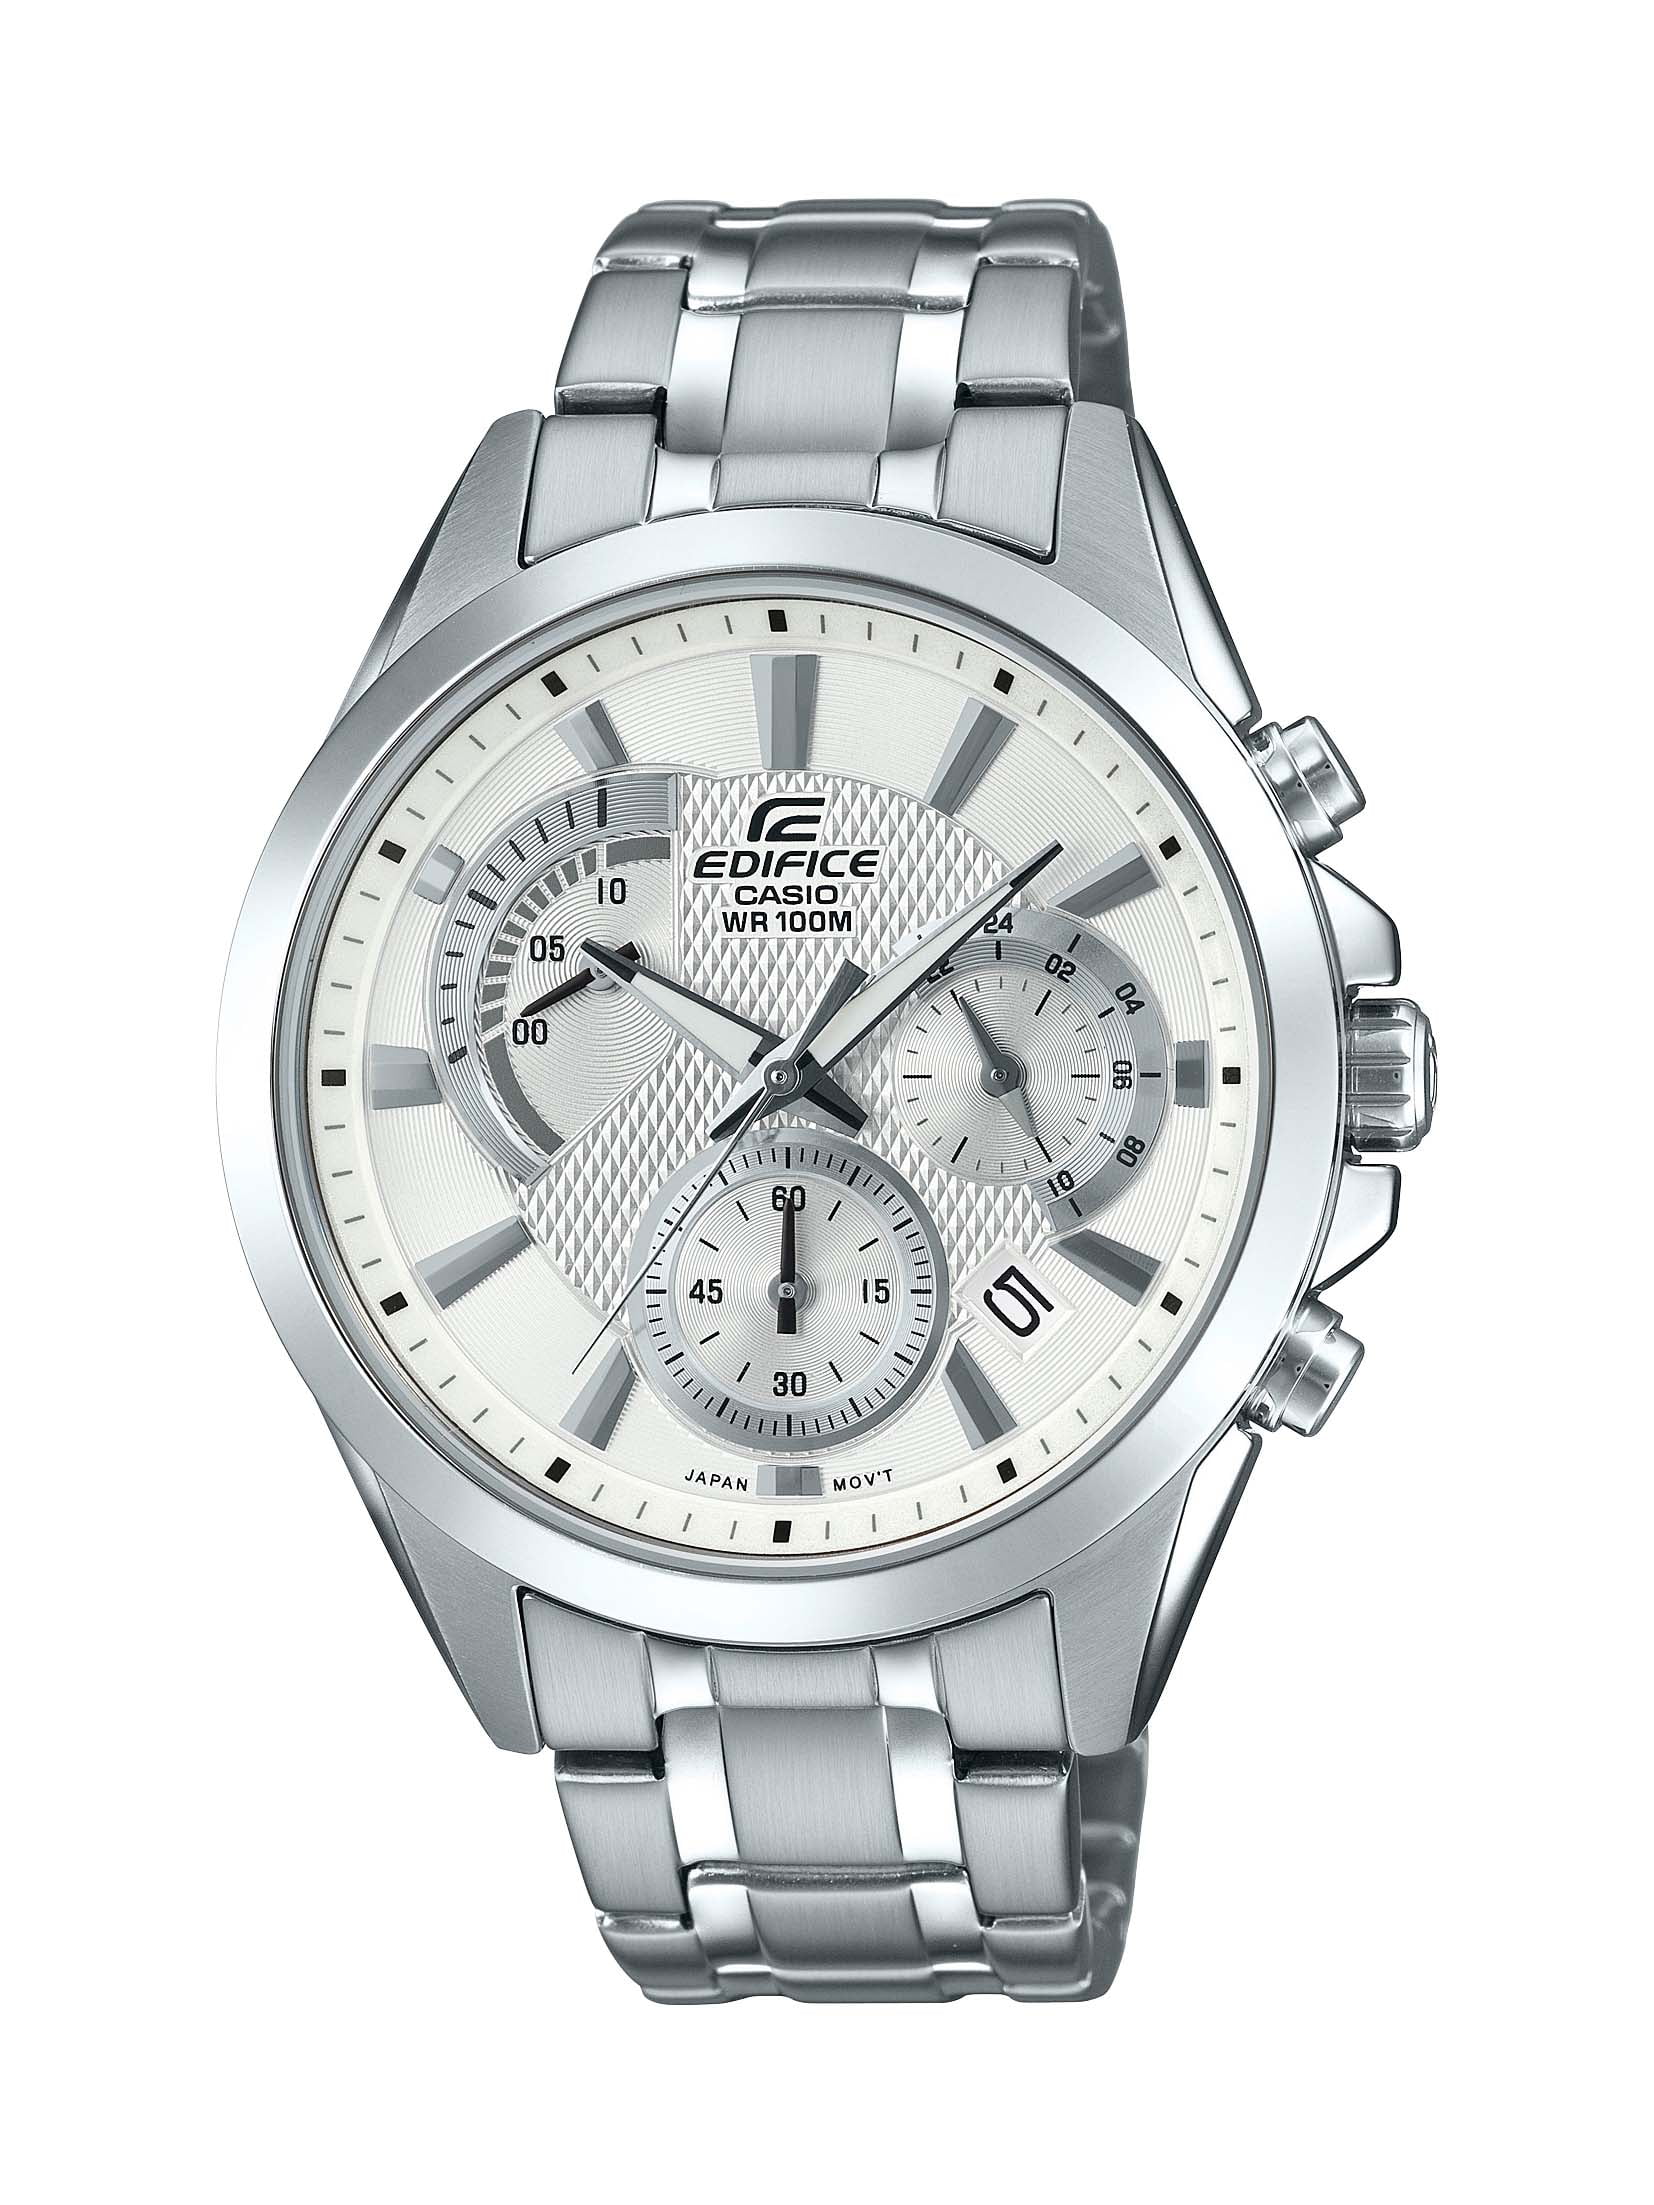 Casio Men\'s Edifice Stainless Steel Chronograph Watch, Silver Dial EFV-580D-7AVUDF